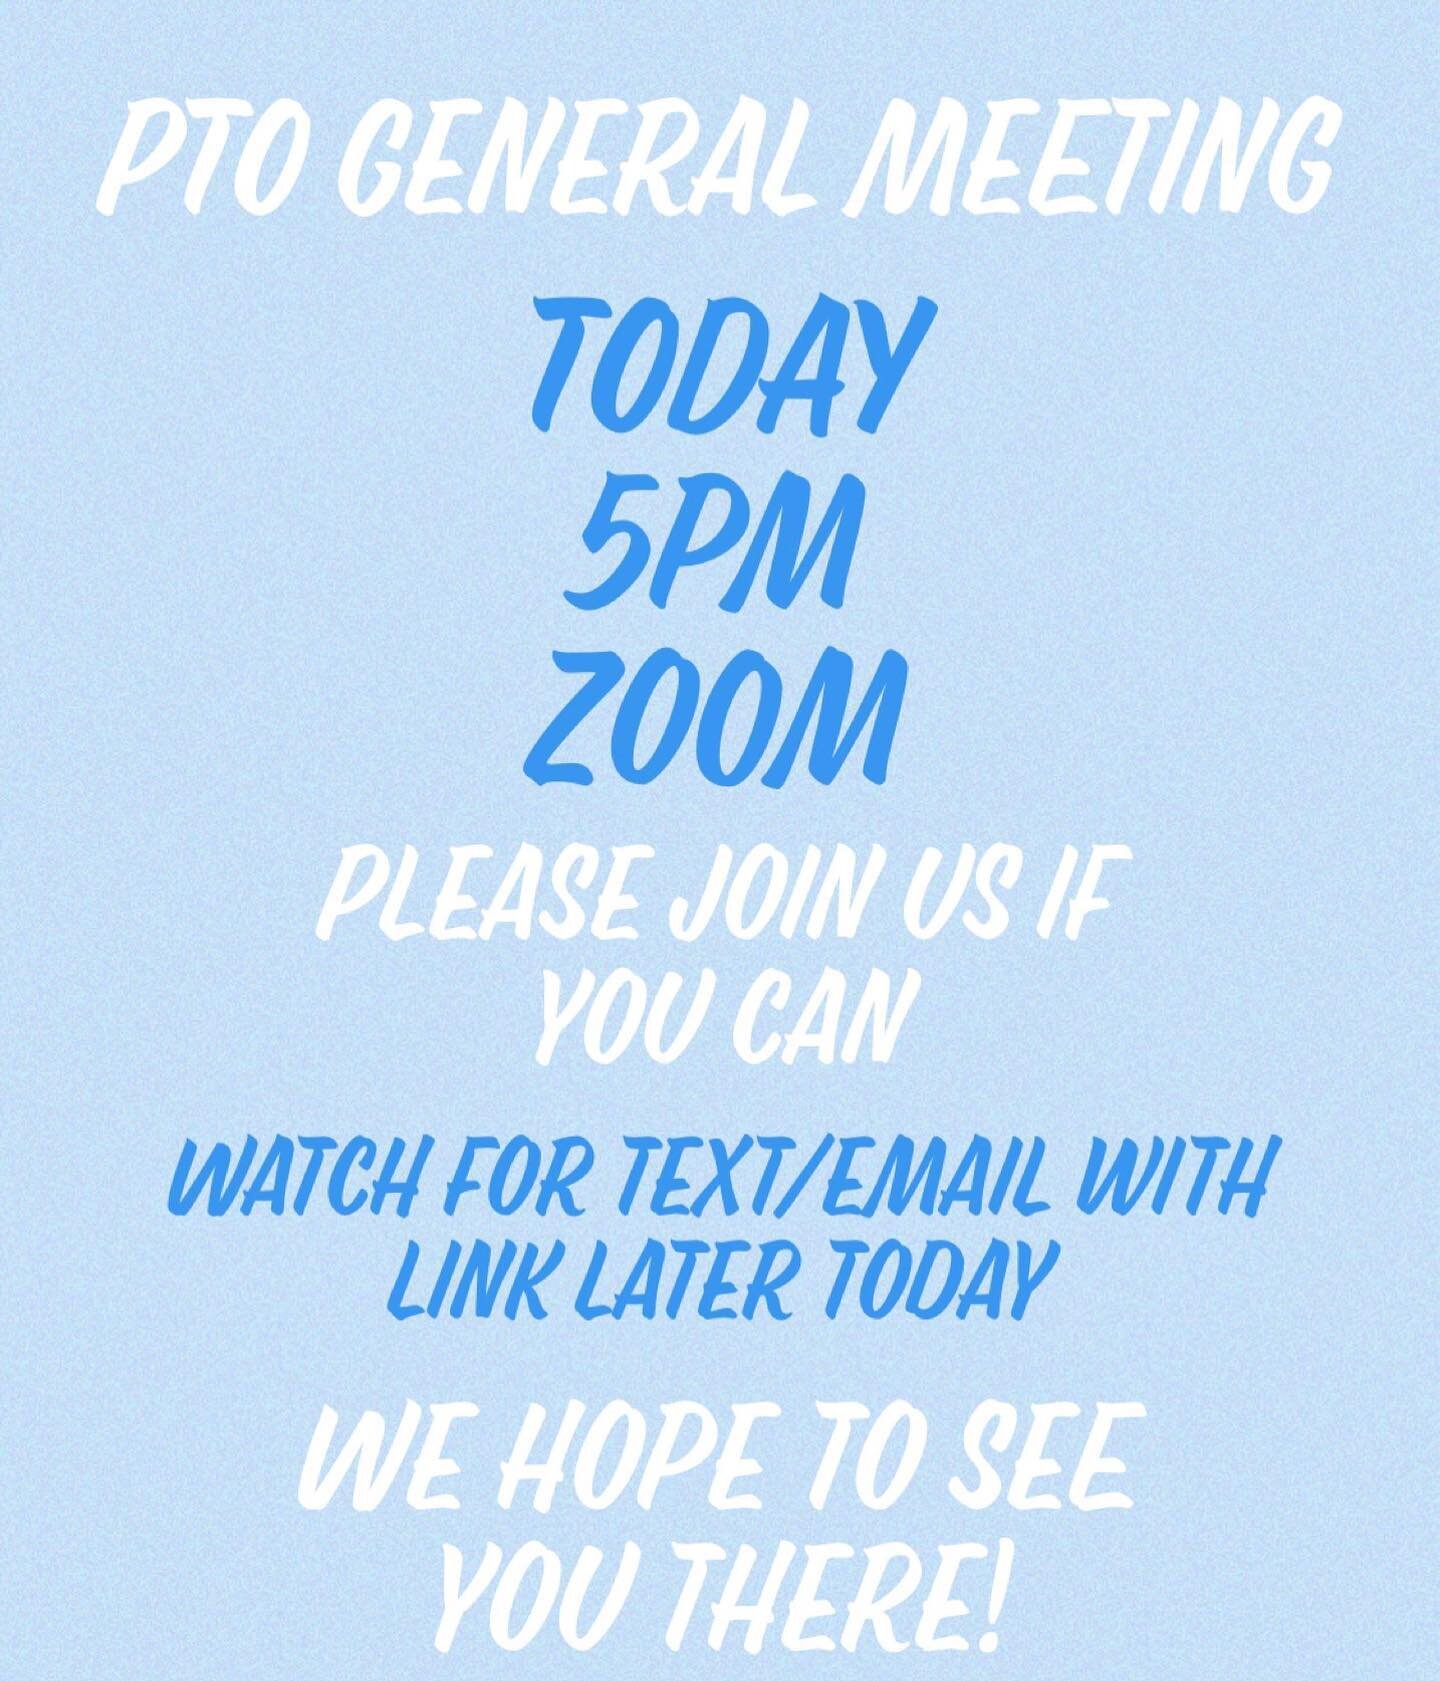 Join us today at 5pm via ZOOM! We will be discussing up &amp; coming events for Guin Foss! We hope to see you there!